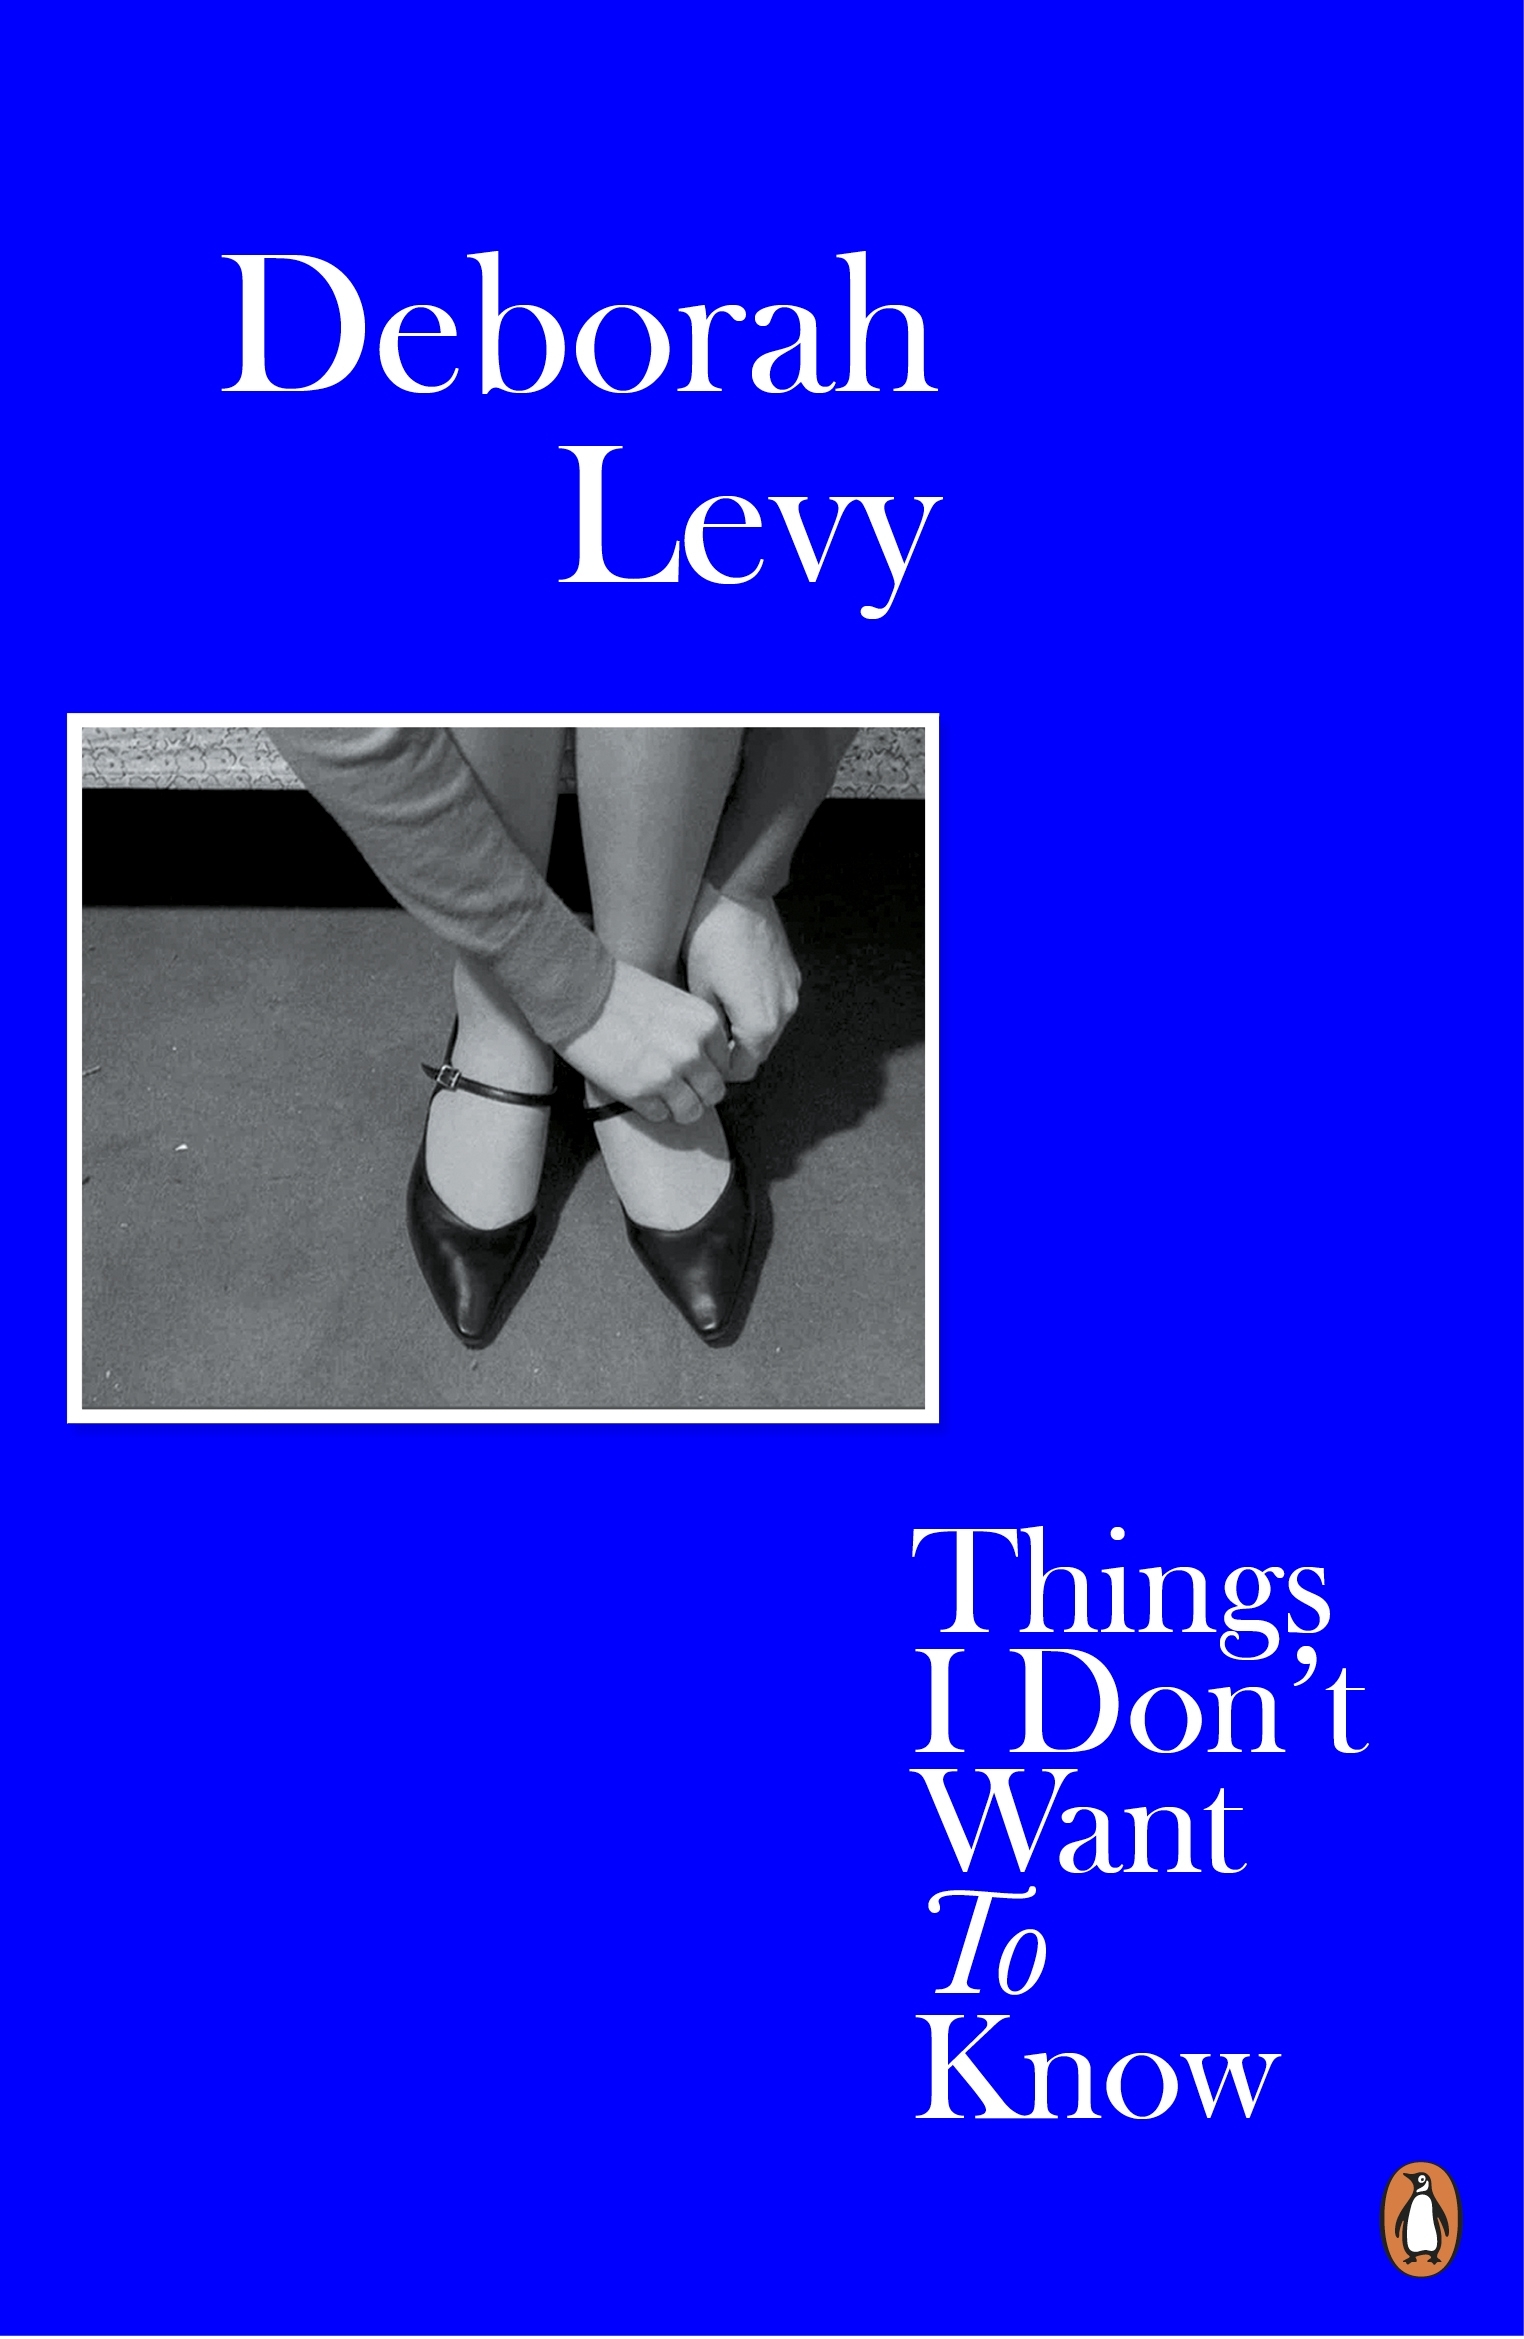 The blue book cover of Things I Don't Want To Know, by Deborah Levy